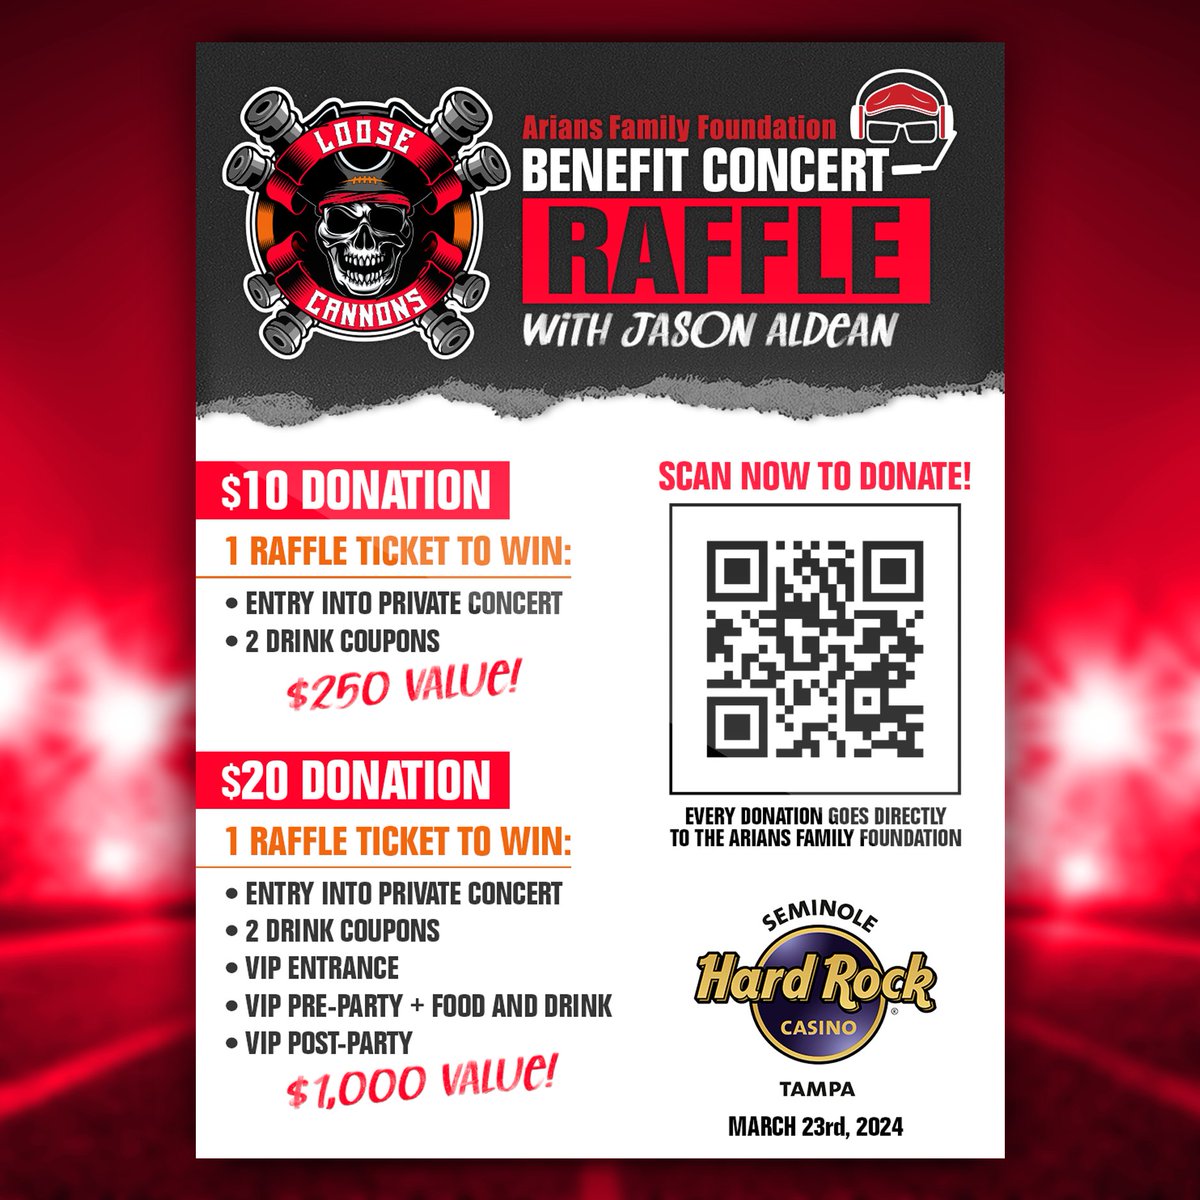 #Bucs fans, YOU can help us raise $20,000 for the @AriansFF for as little as $10, and you could win entry to a private Jason Aldean concert and more! Every $10 or $20 donation = 1 raffle ticket towards one of two raffle prizes, including a PRIVATE VIP Pre-Party and Post-Party!